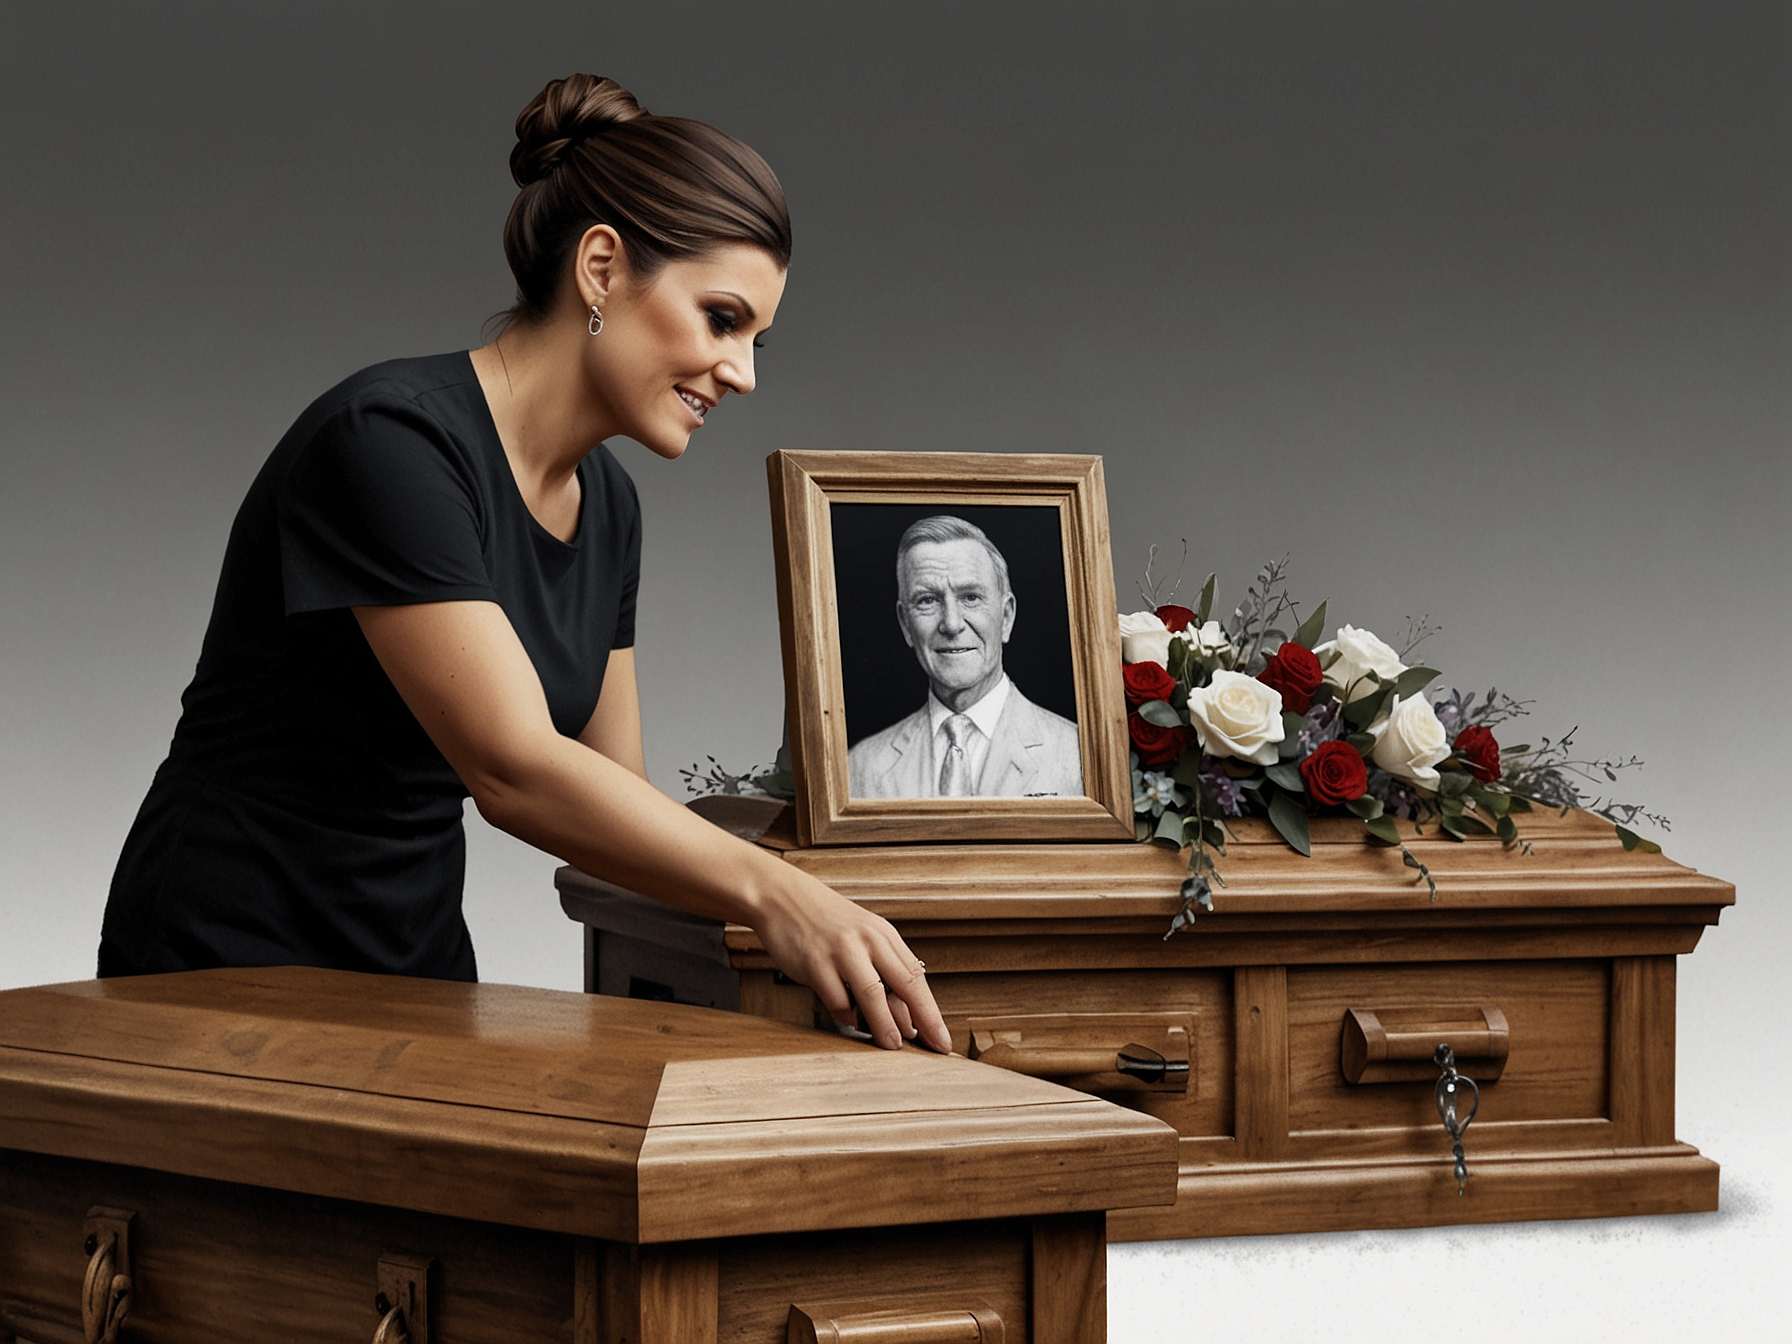 Kym Marsh placing a photograph of a cherished moment with her father into his coffin as a heartfelt final tribute symbolizing their unbreakable bond.